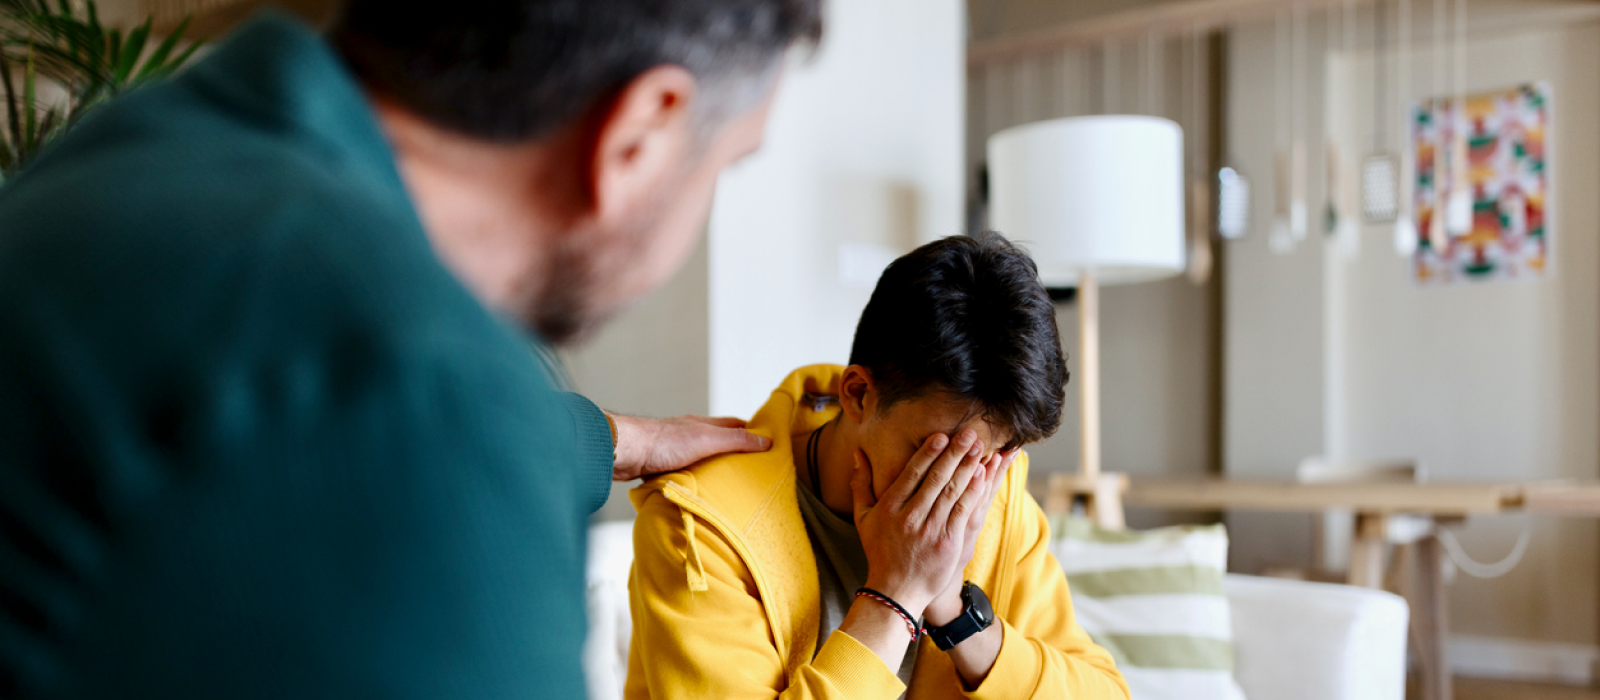 A man comforts his son at their home. His child has expressed suicidal thoughts.